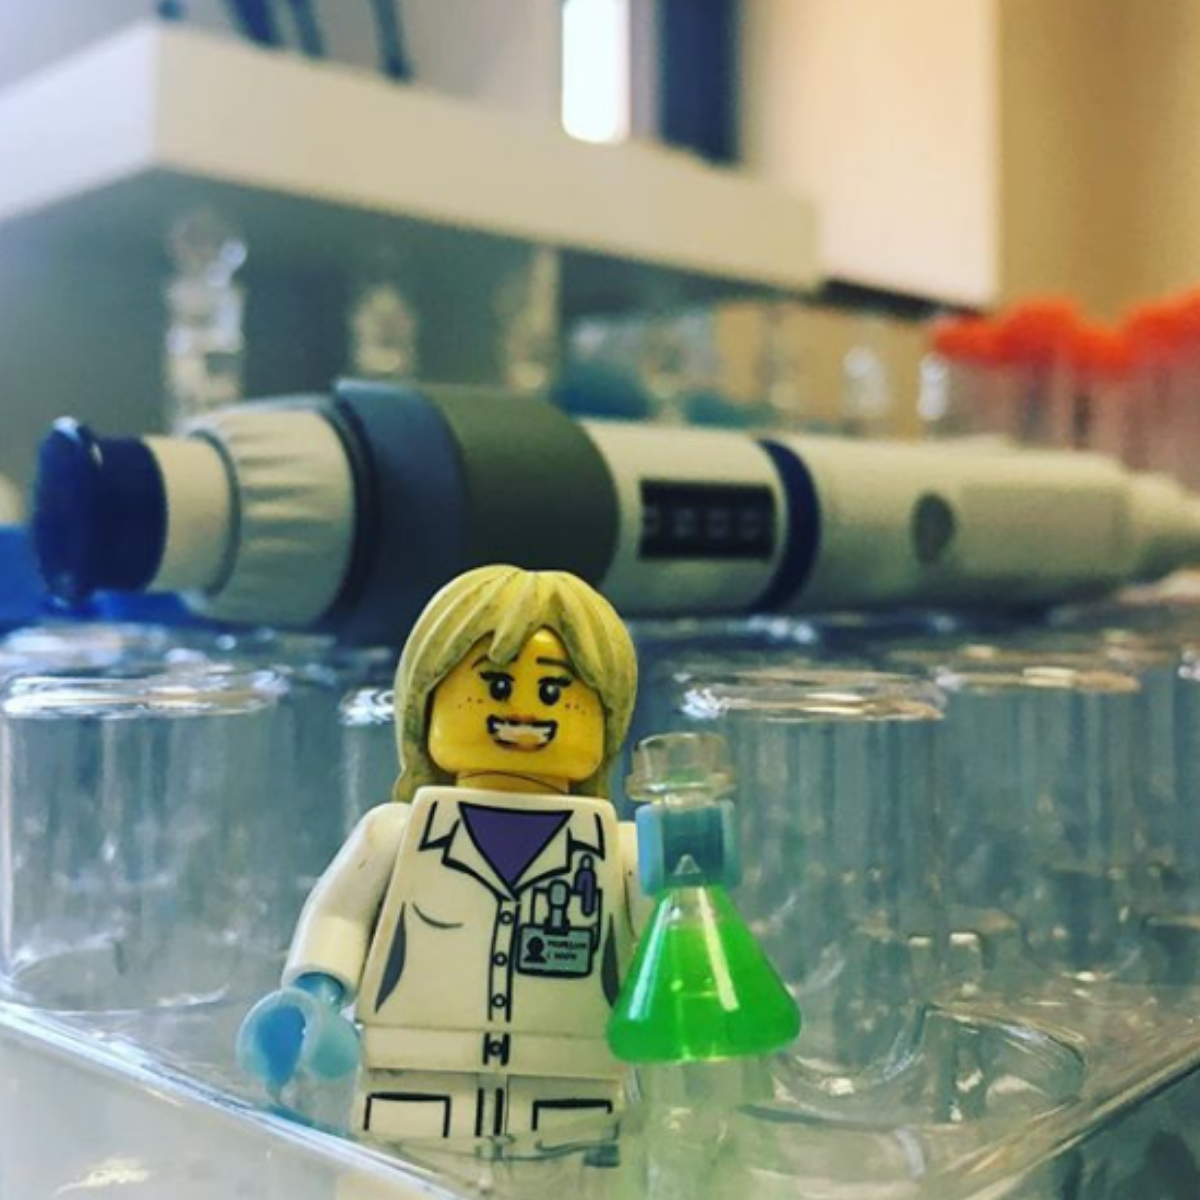 Lego Guy In Science Lab